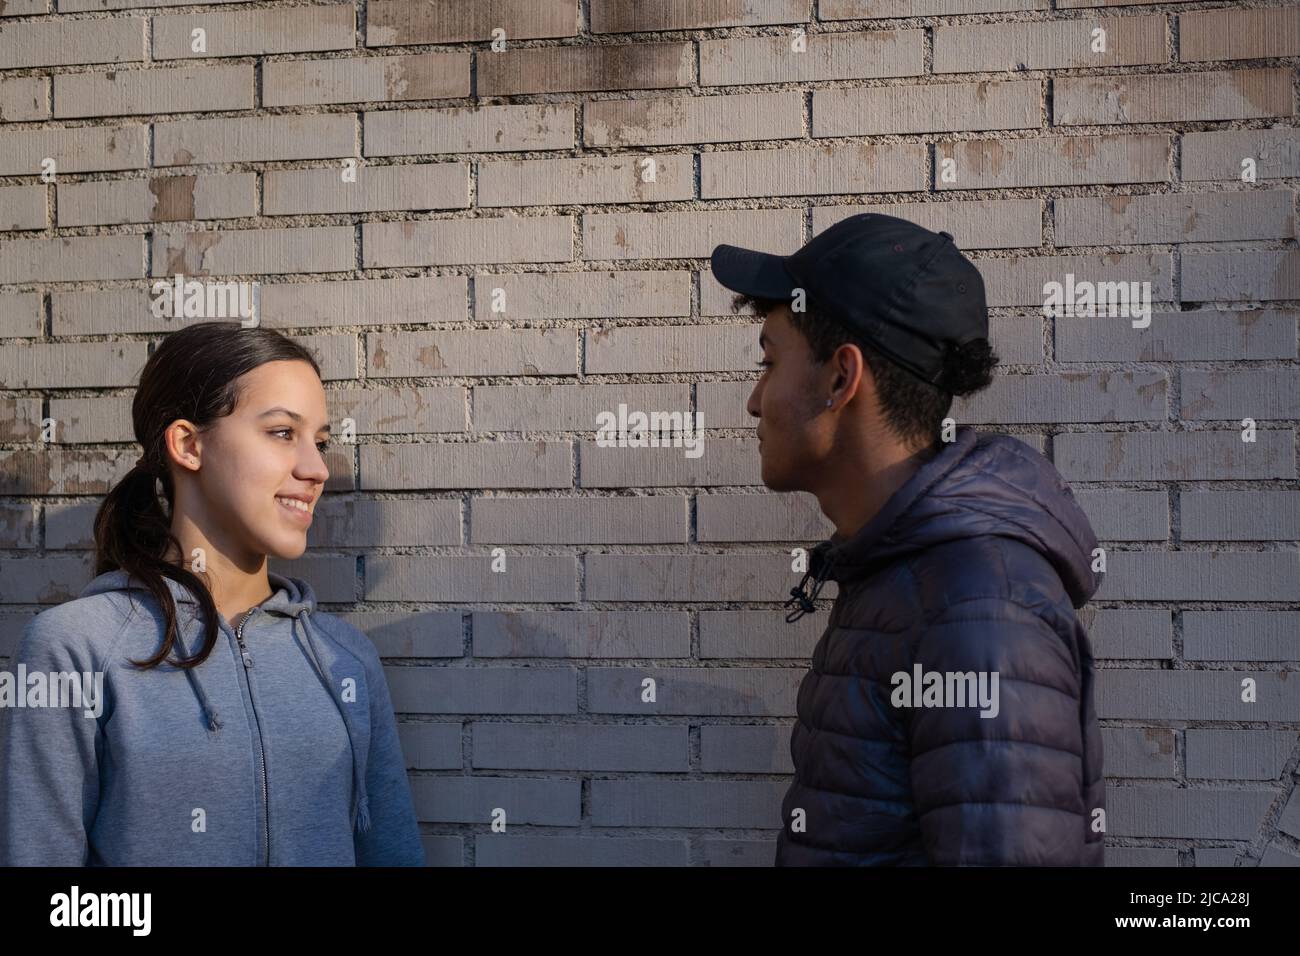 Young couple talking and smiling standing against a brick wall. Love signals between teenagers. Stock Photo